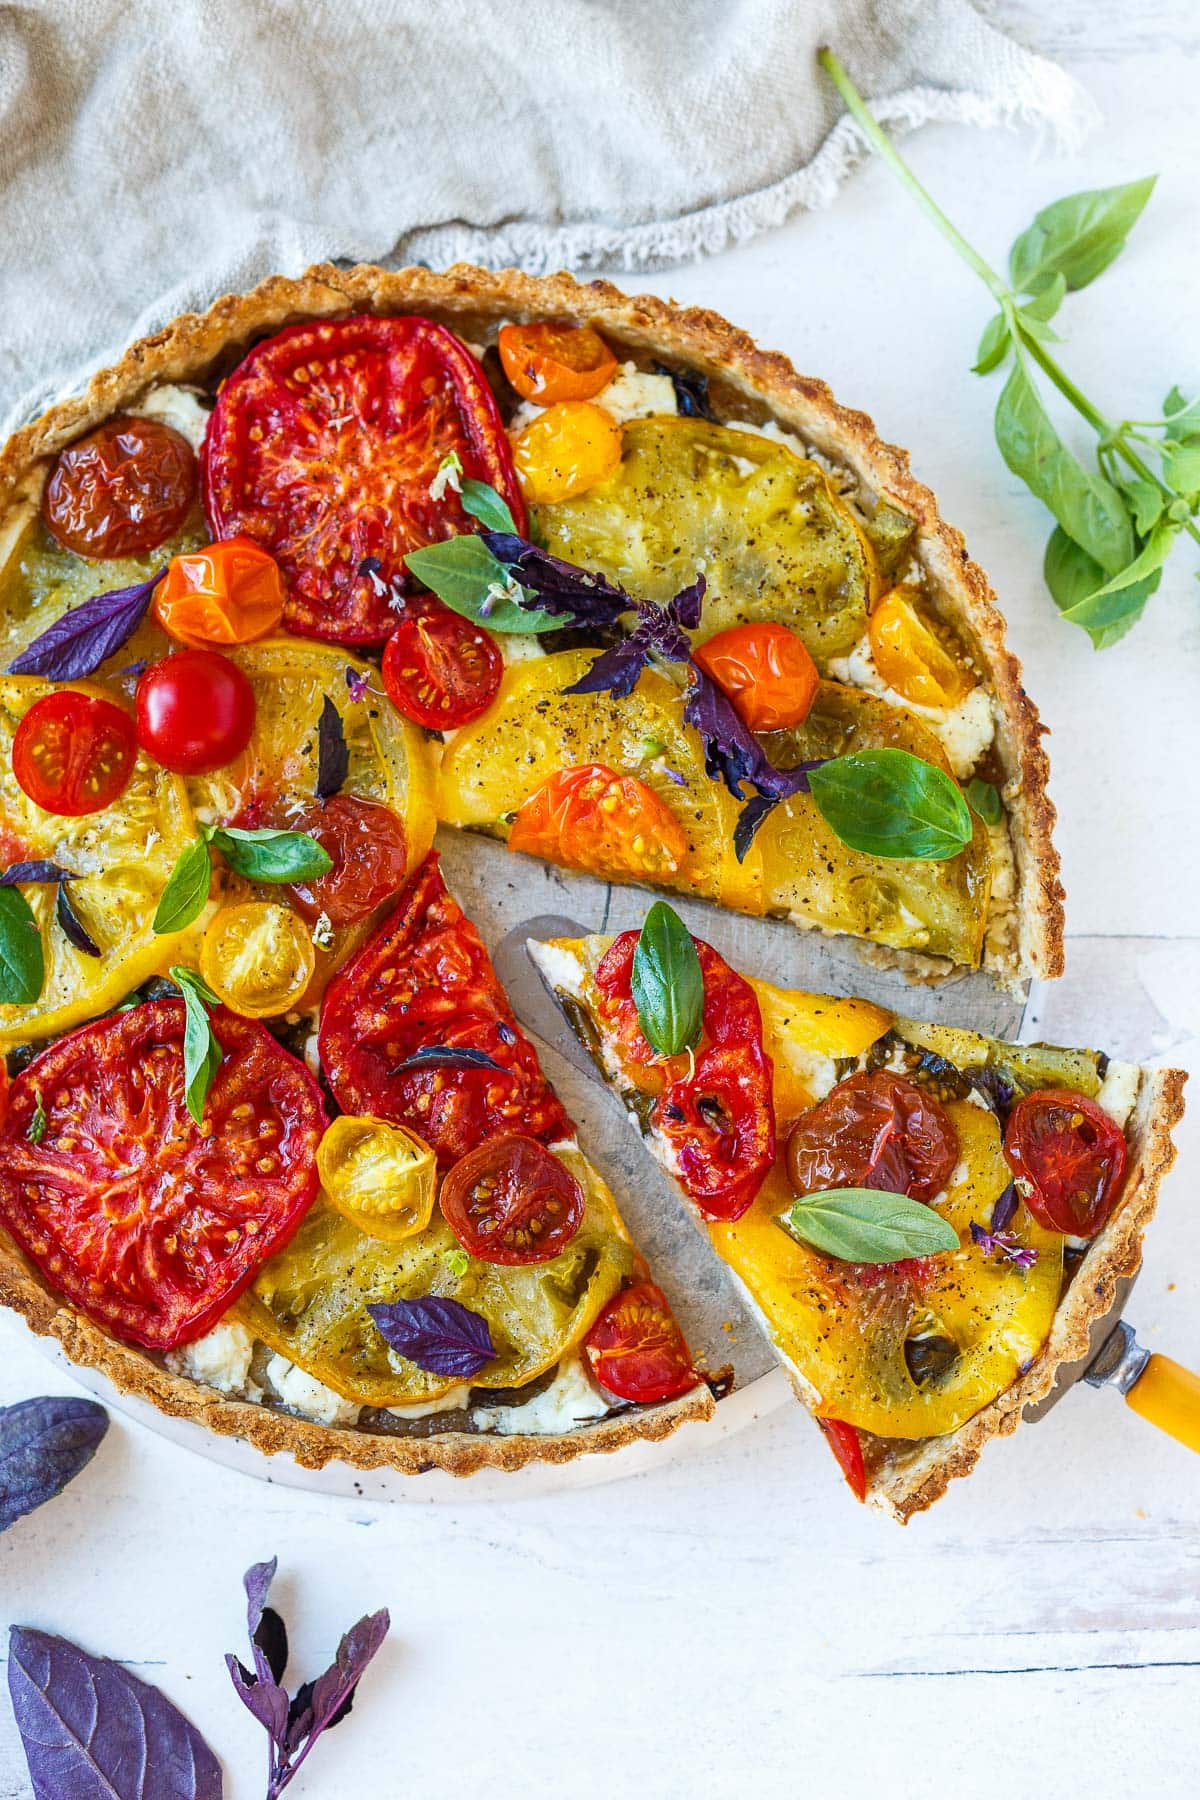 Elegant and savory, this fresh Tomato Tart is made with a flaky olive oil crust, juicy summer heirloom tomatoes, creamy goat cheese, and fresh basil.